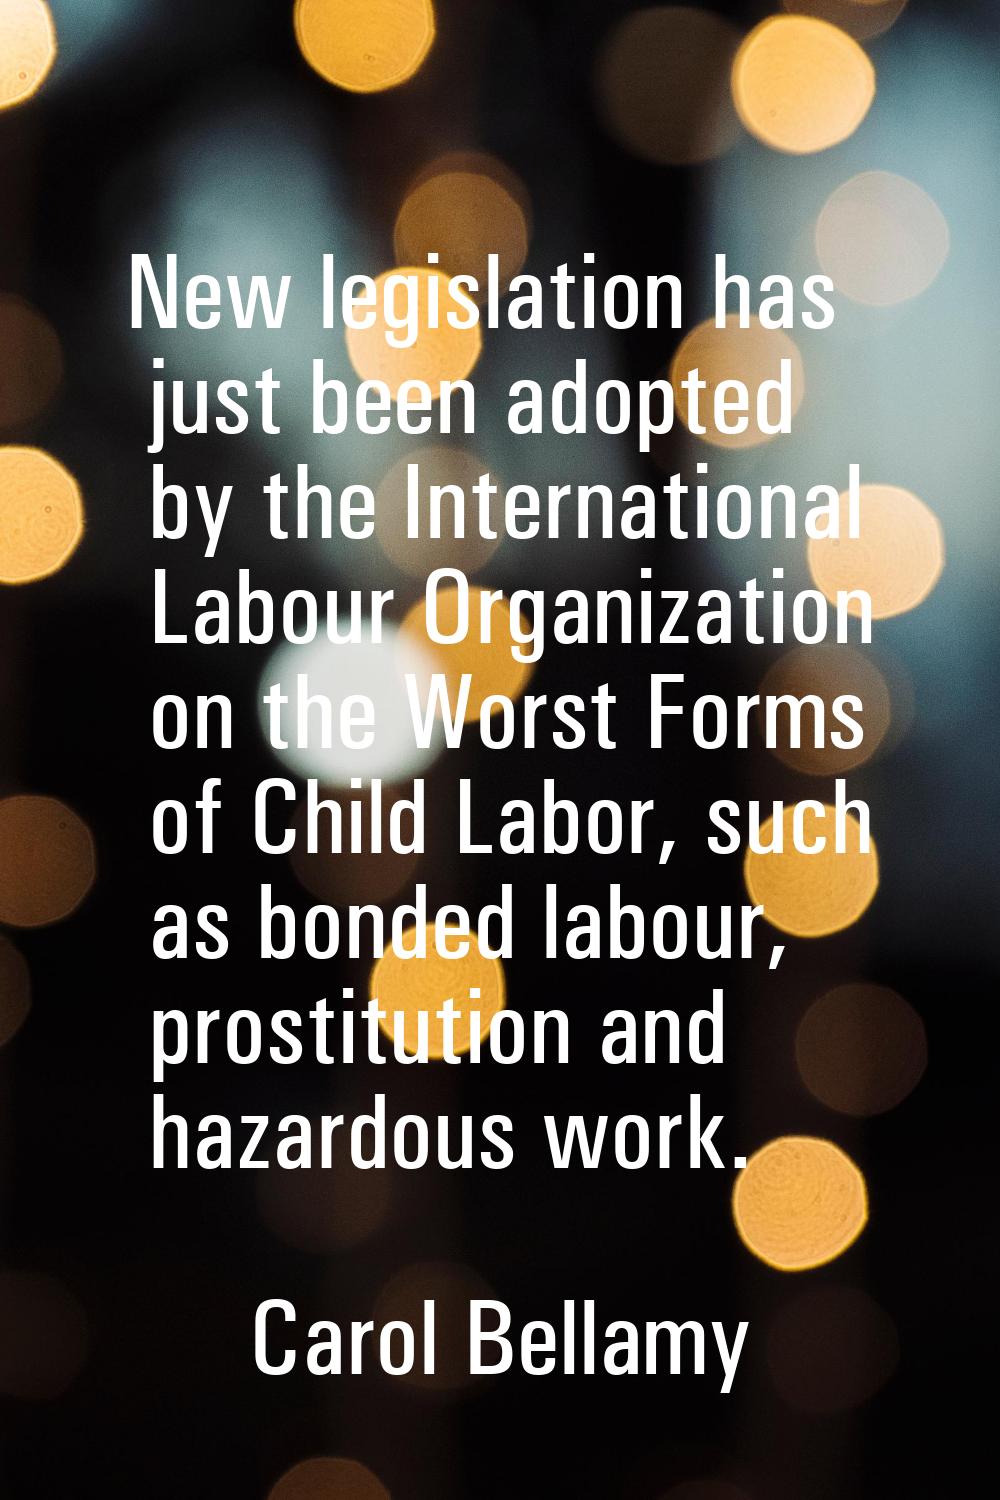 New legislation has just been adopted by the International Labour Organization on the Worst Forms o